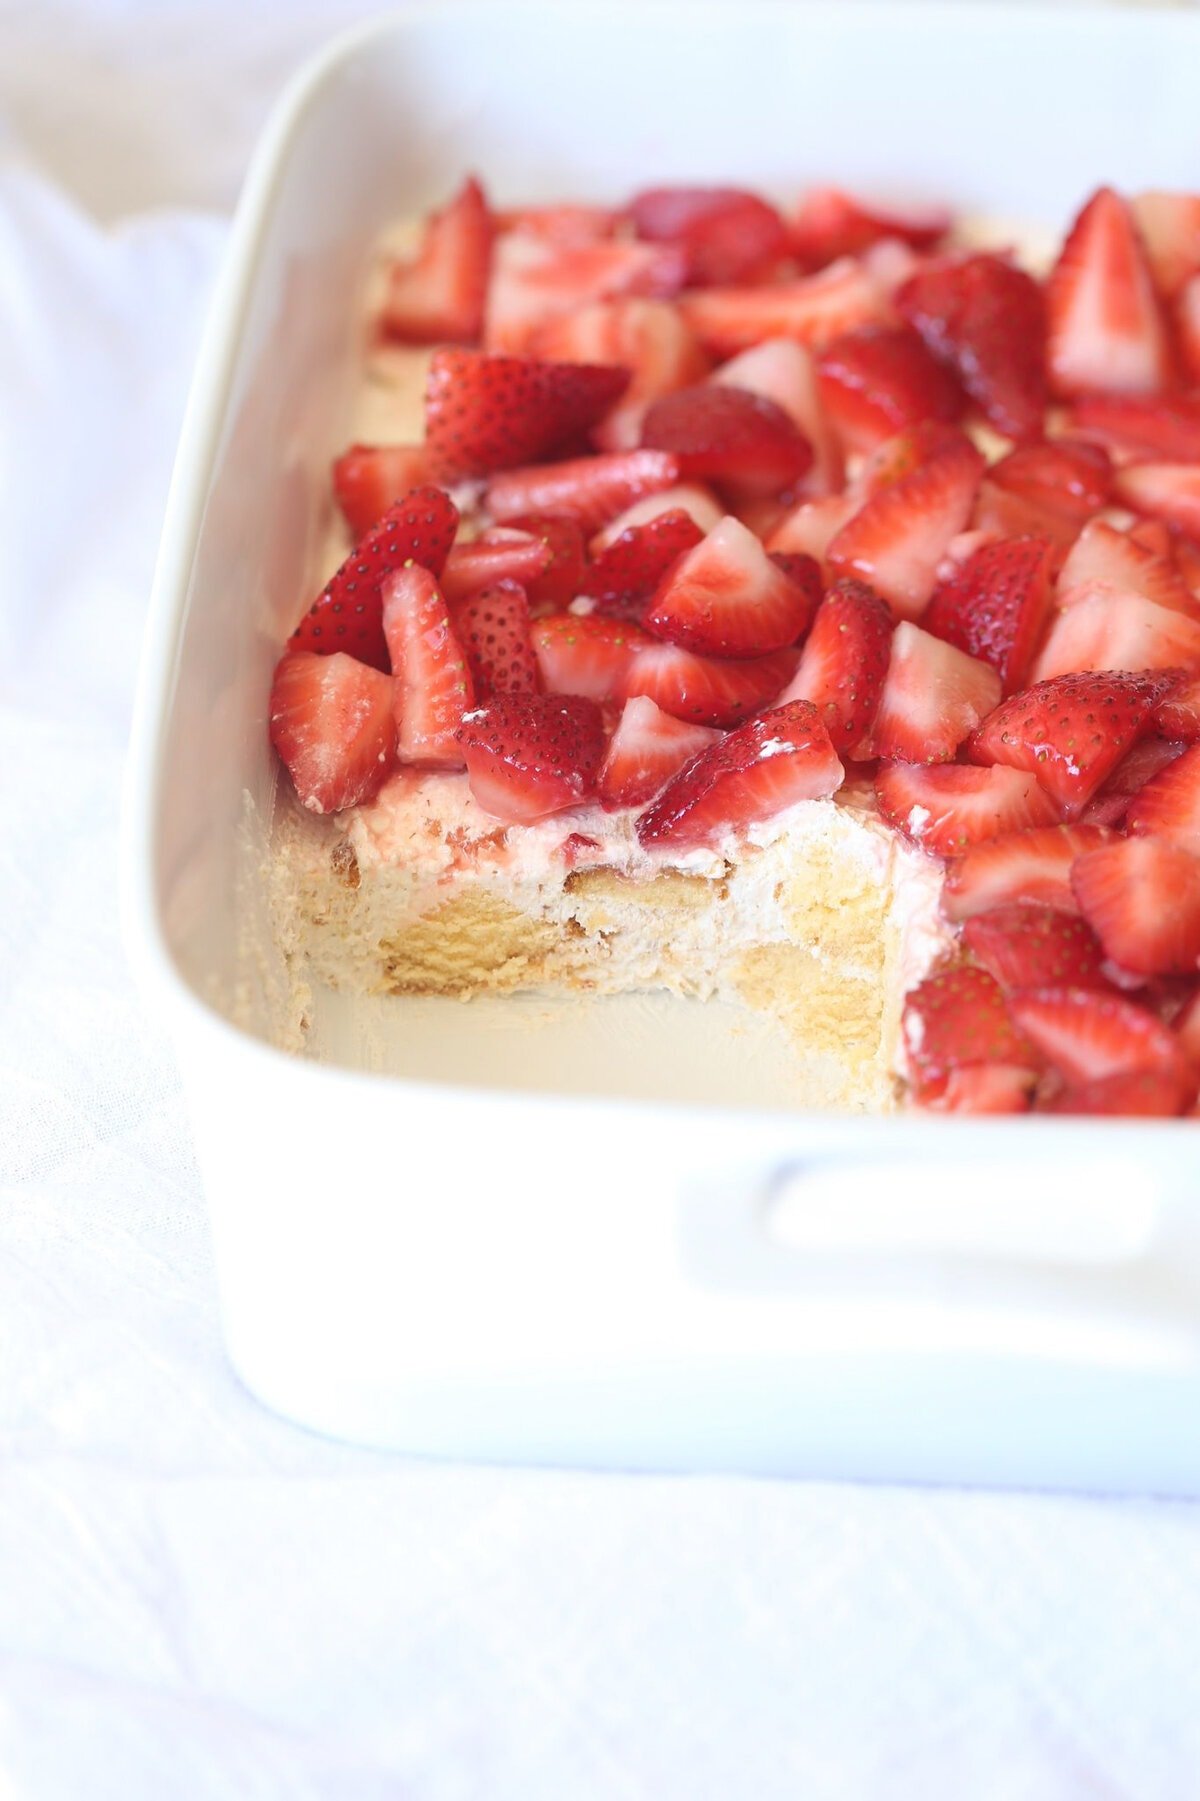 Strawberry shortcake served in a 9x13 pan